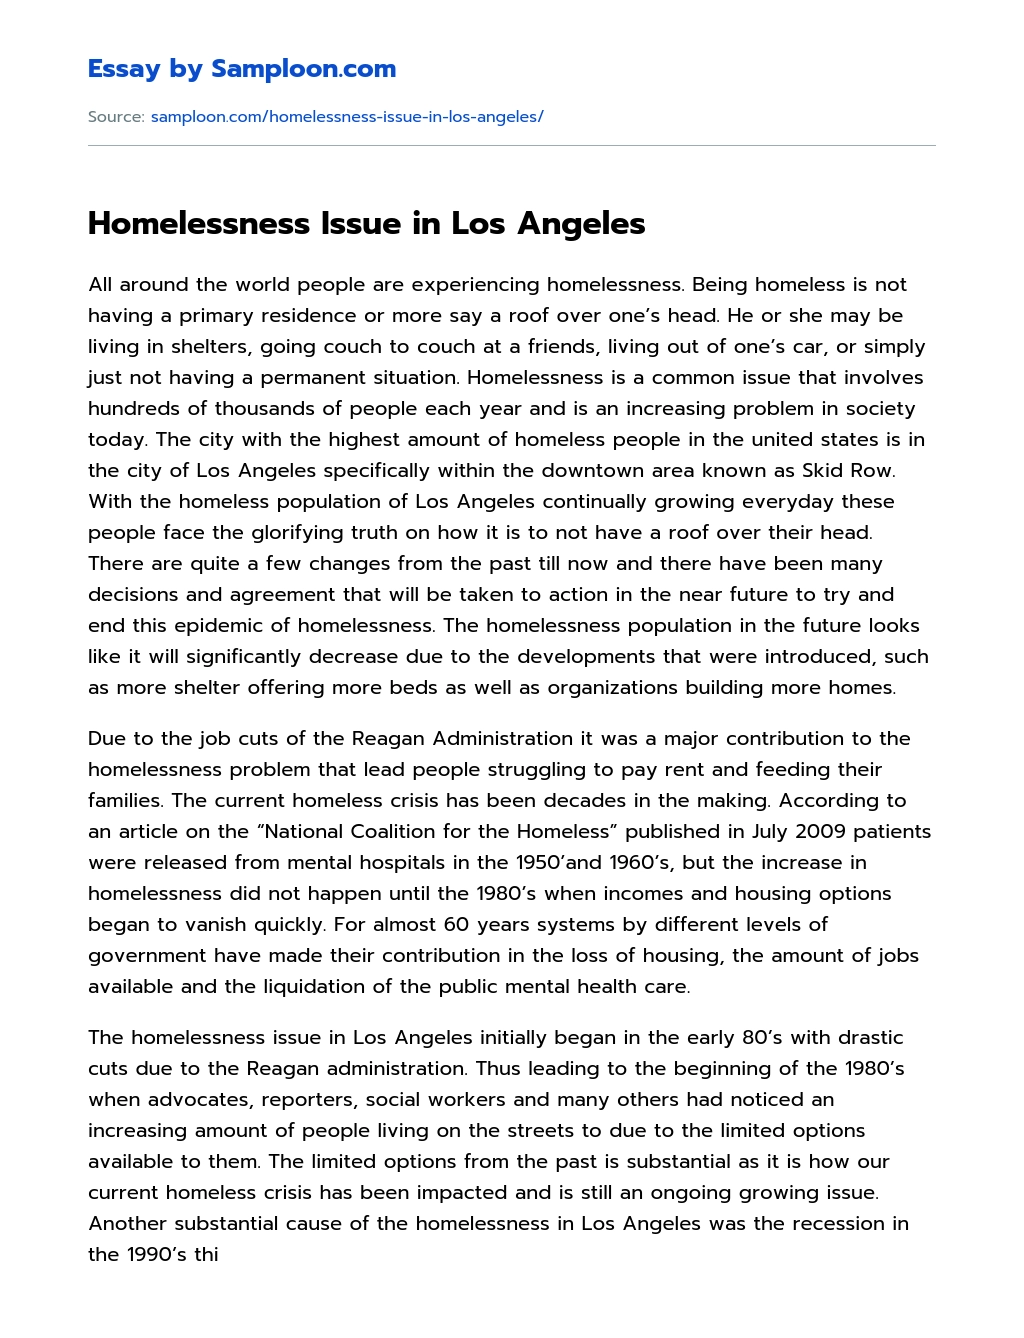 Homelessness Issue in Los Angeles essay